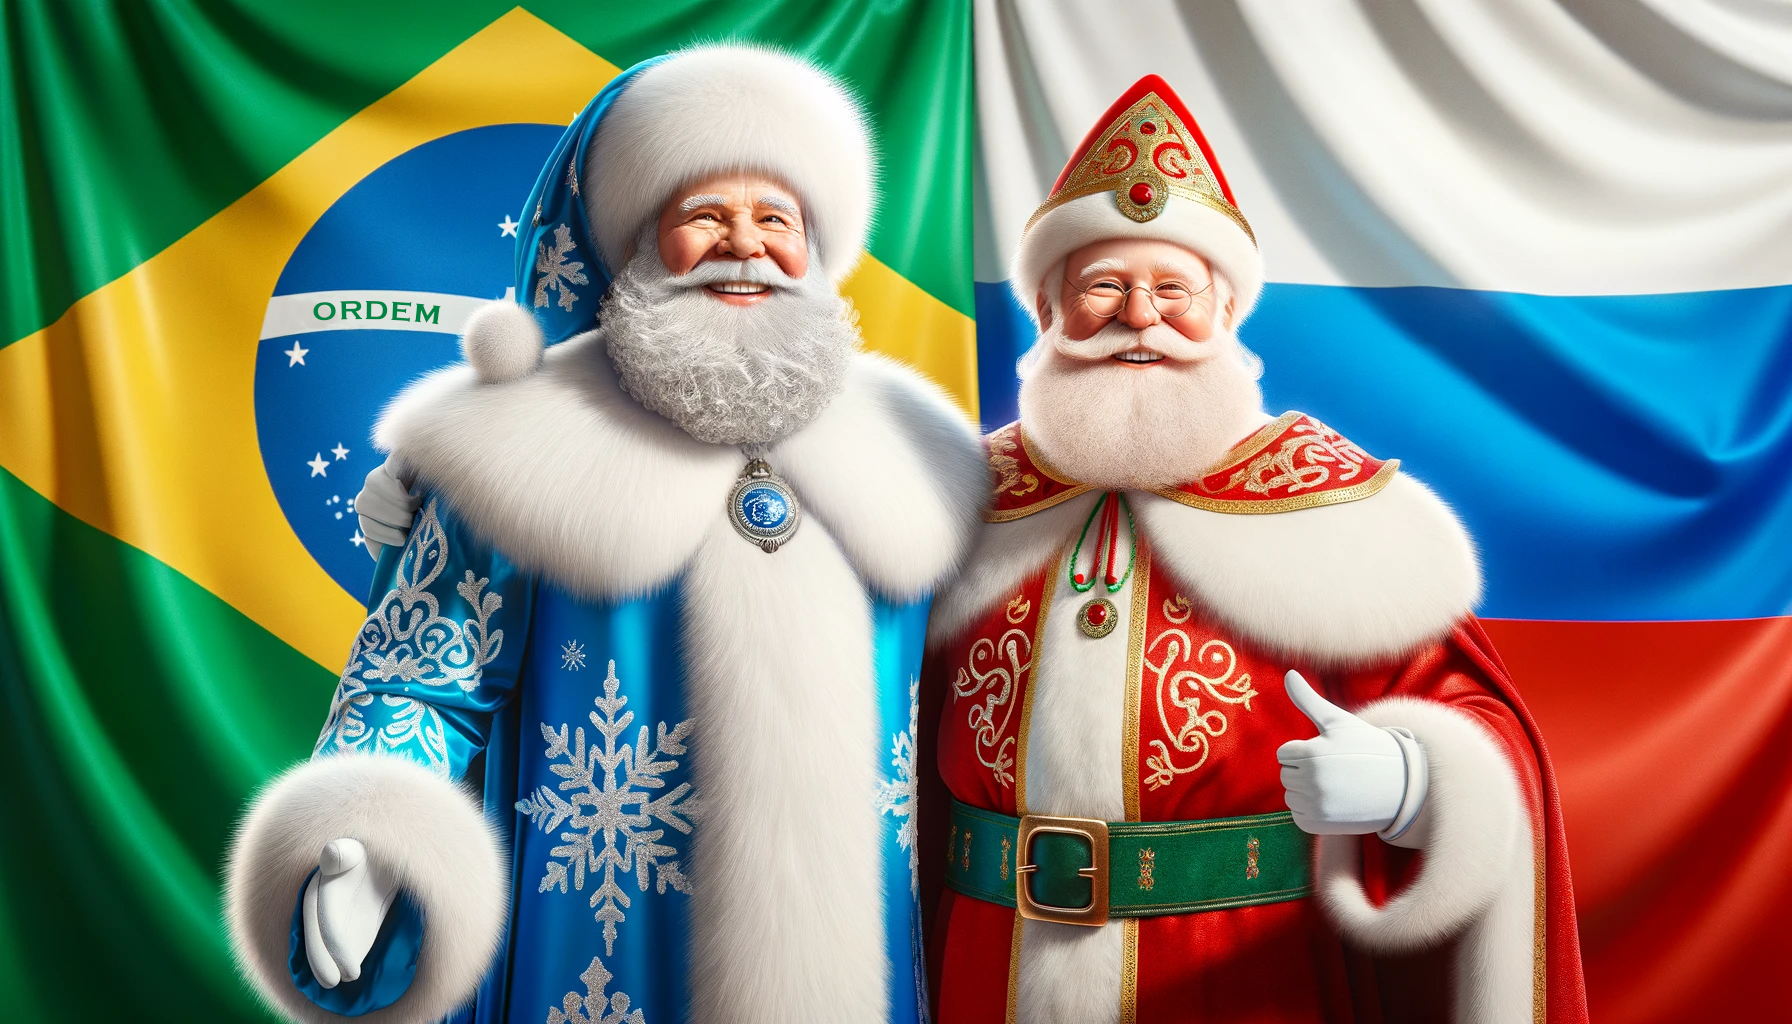 DALL·E 2023 12 25 17.59.33 A realistic photo of Santa Claus in his traditional red suit with white fur trim and Ded Moroz in his distinctive blue robe with frost patterns stand